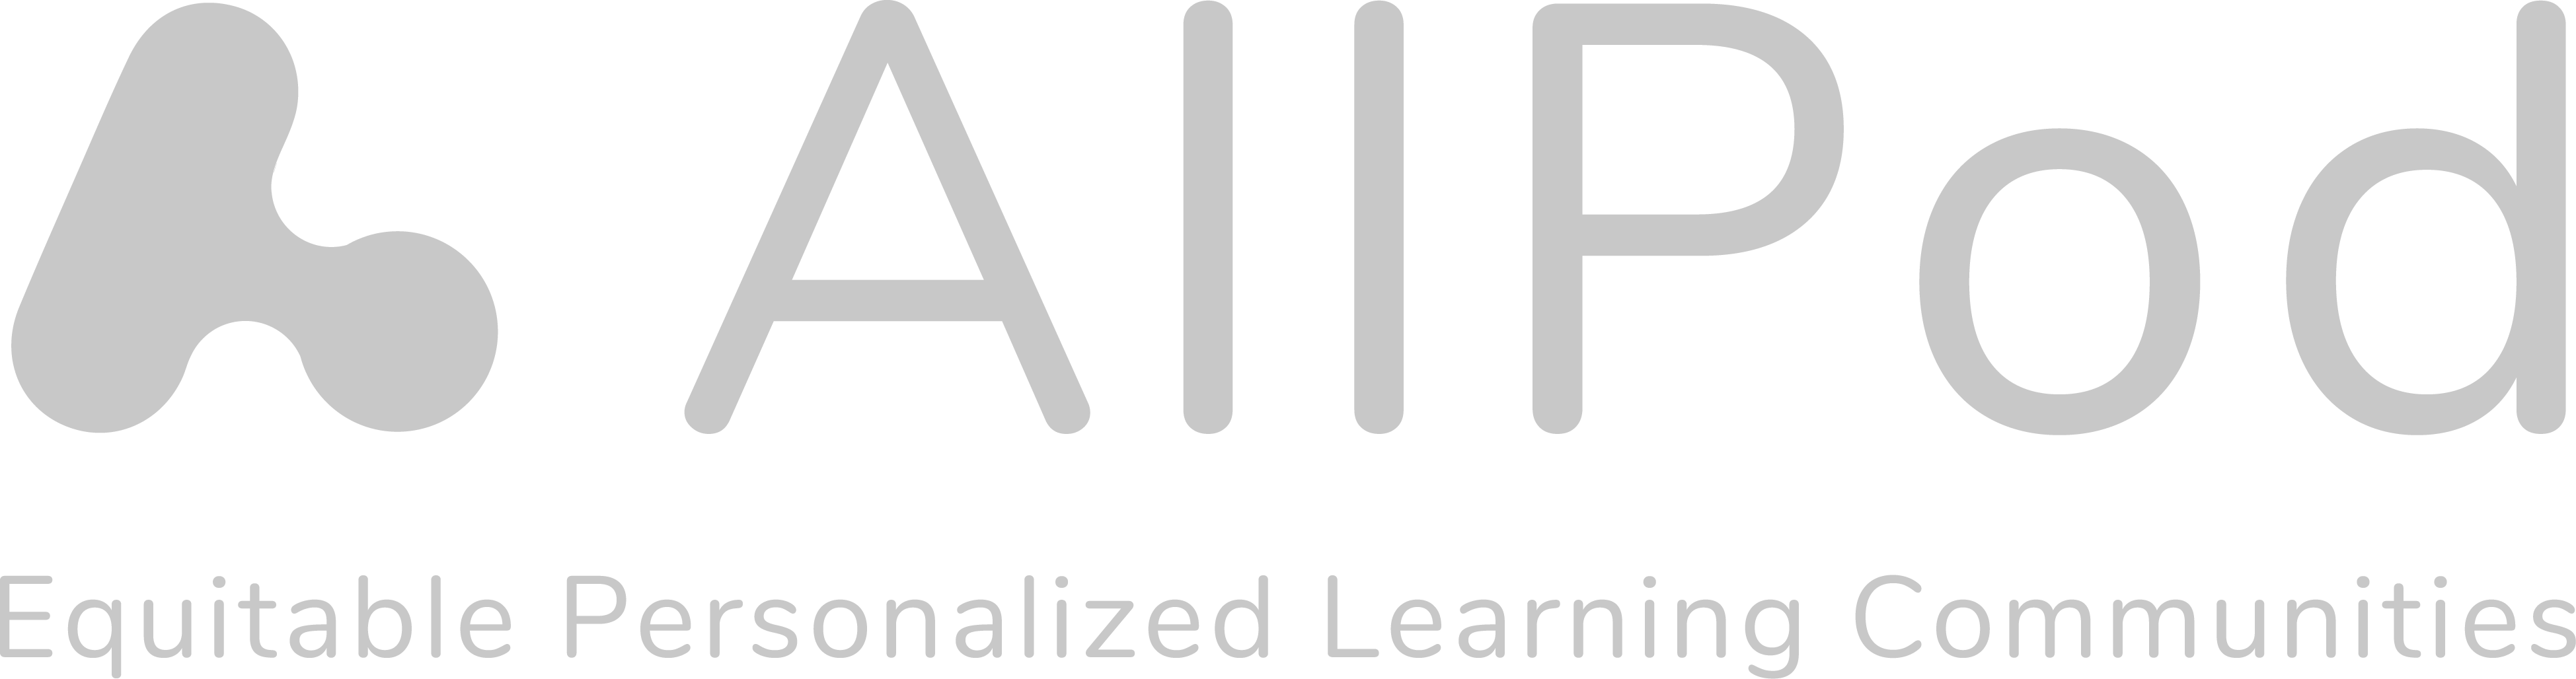 Gray AllPod Equitable Personalized Learning Communities logo